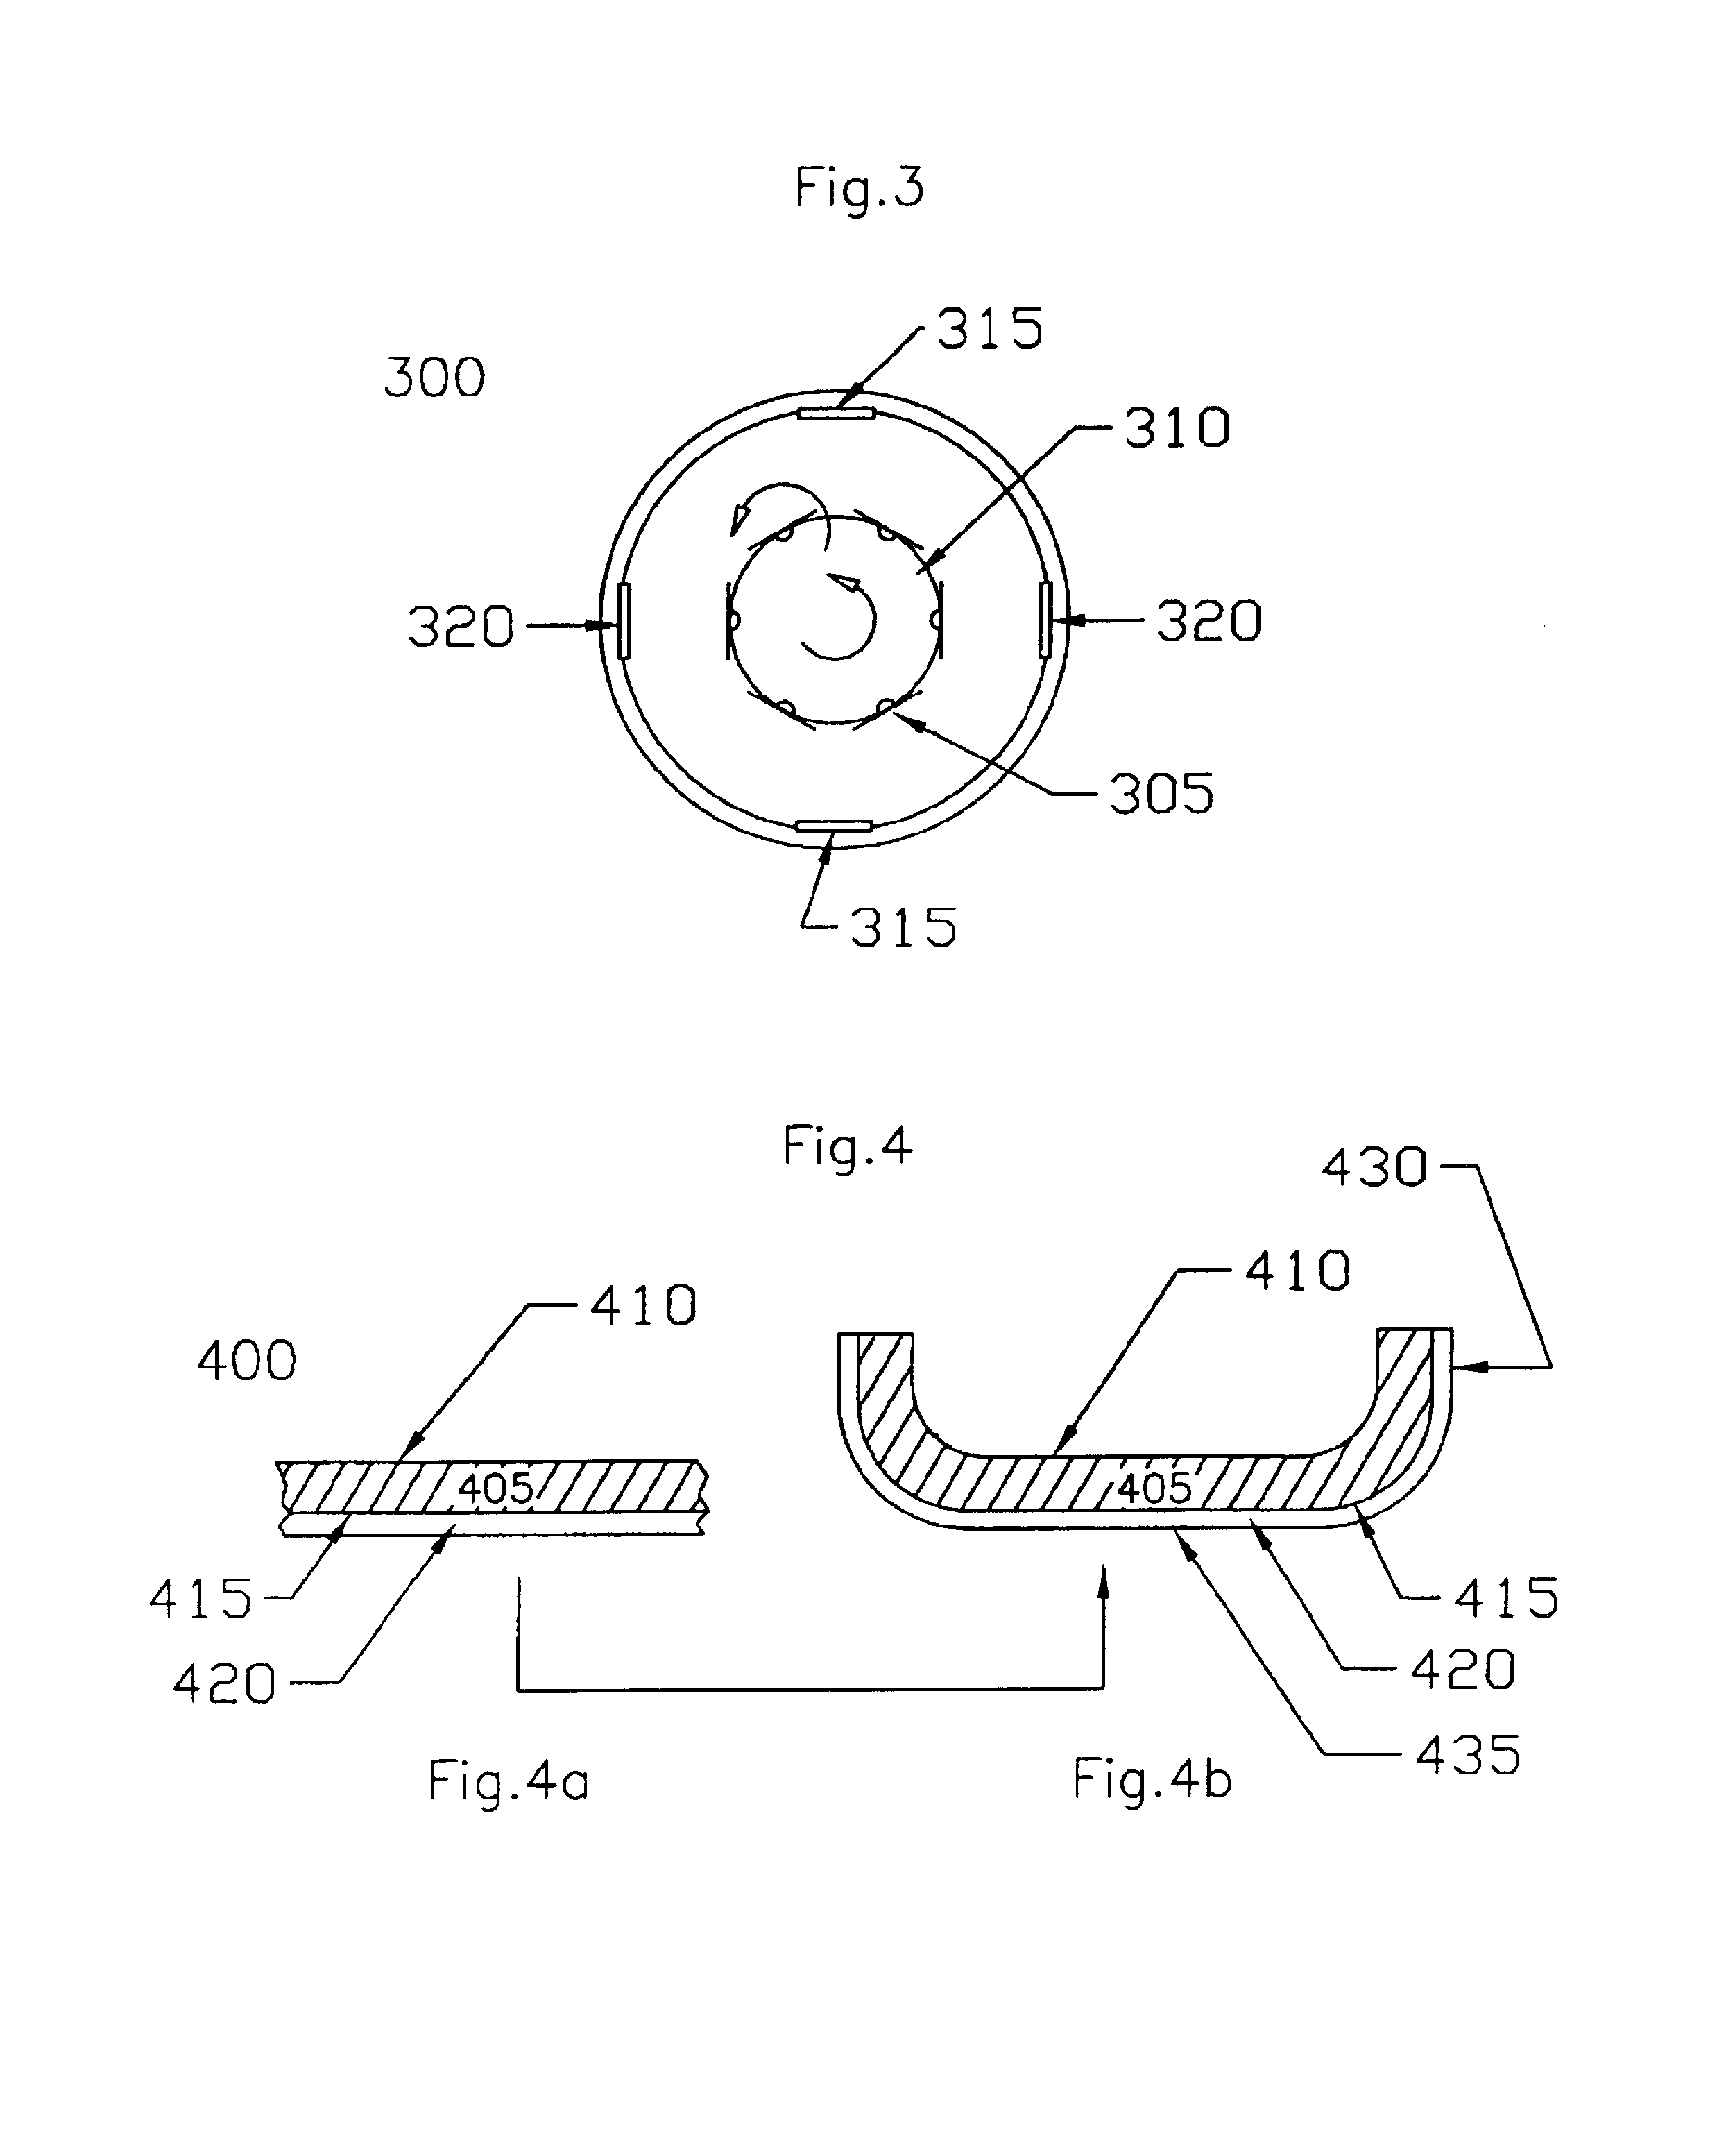 Foodware with a tarnish-resistant ceramic coating and method of making